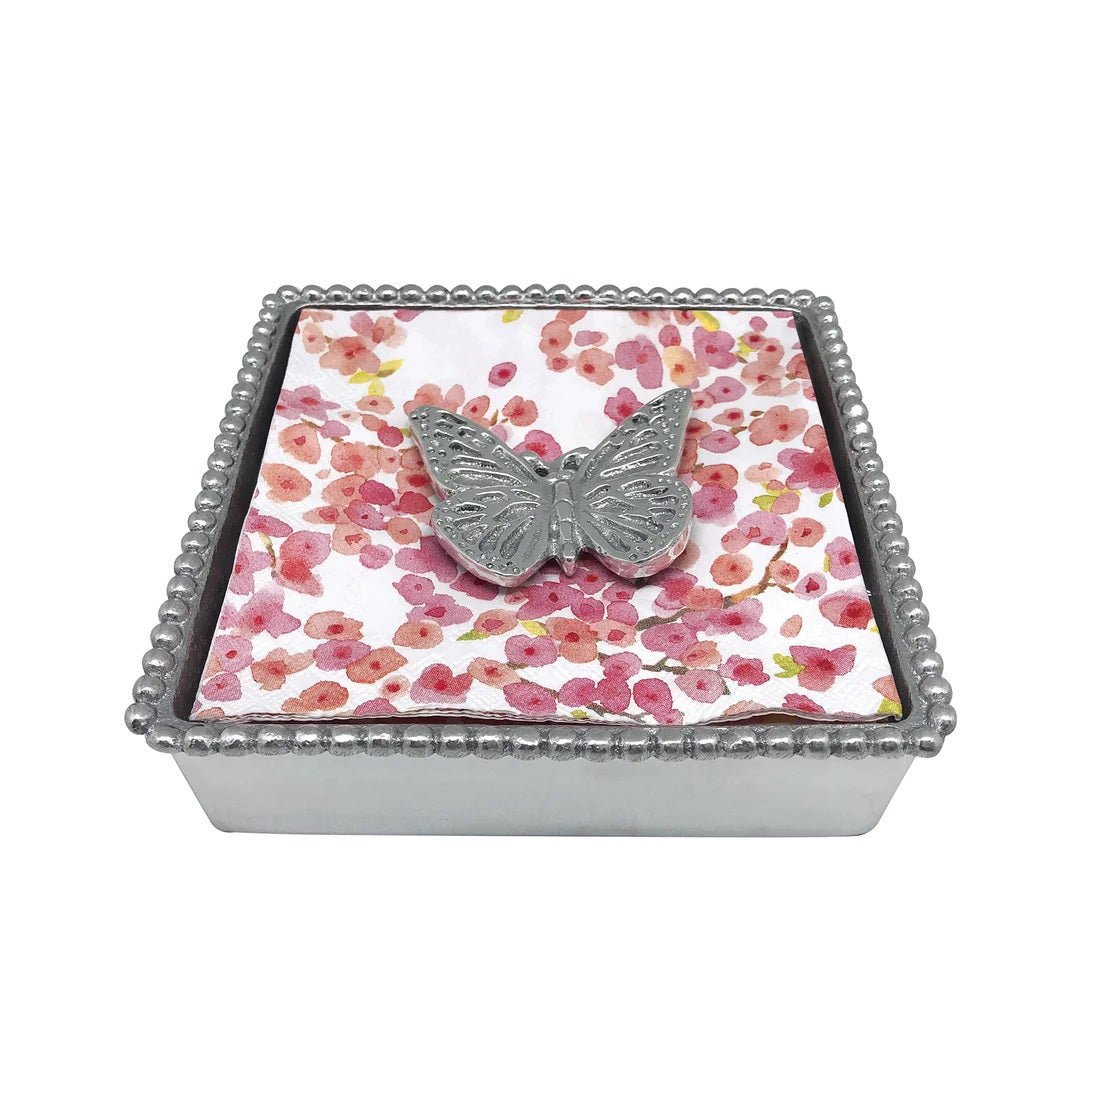 Monarch Butterfly Napkin Box - Gaines Jewelers